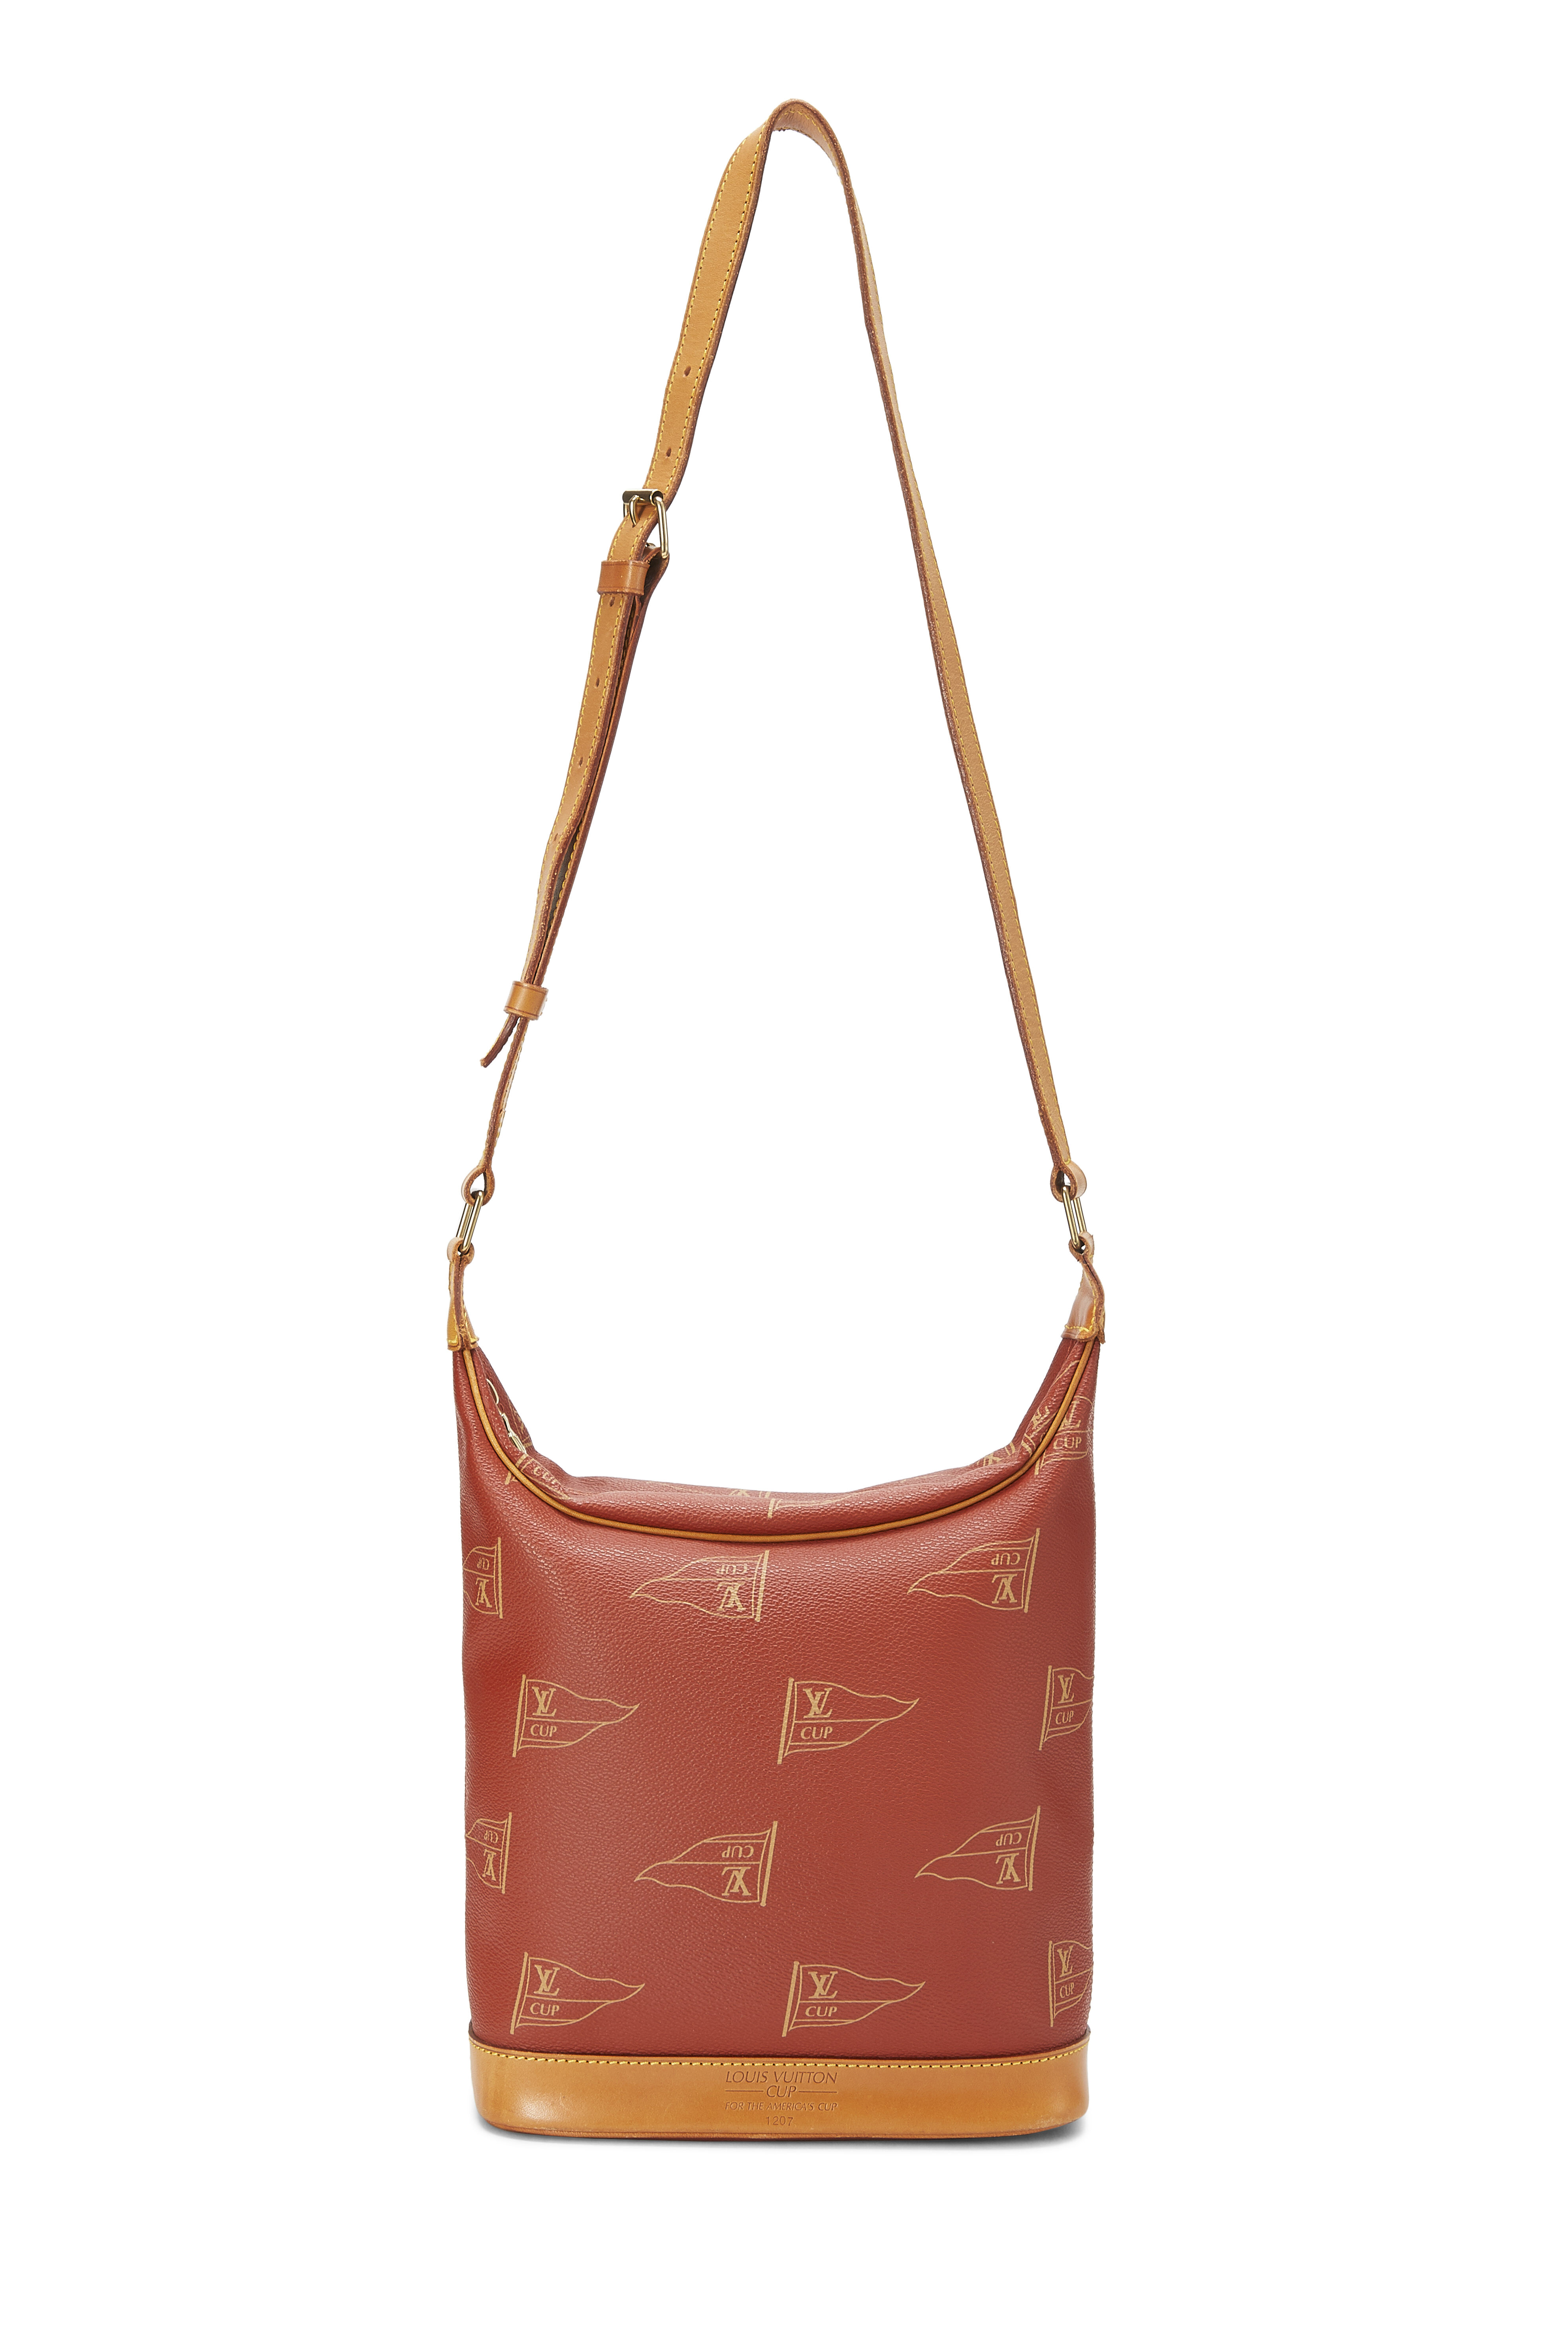 LOUIS VUITTON c.1994 Limited Edition Golf Cup Hawaii LV Monogram